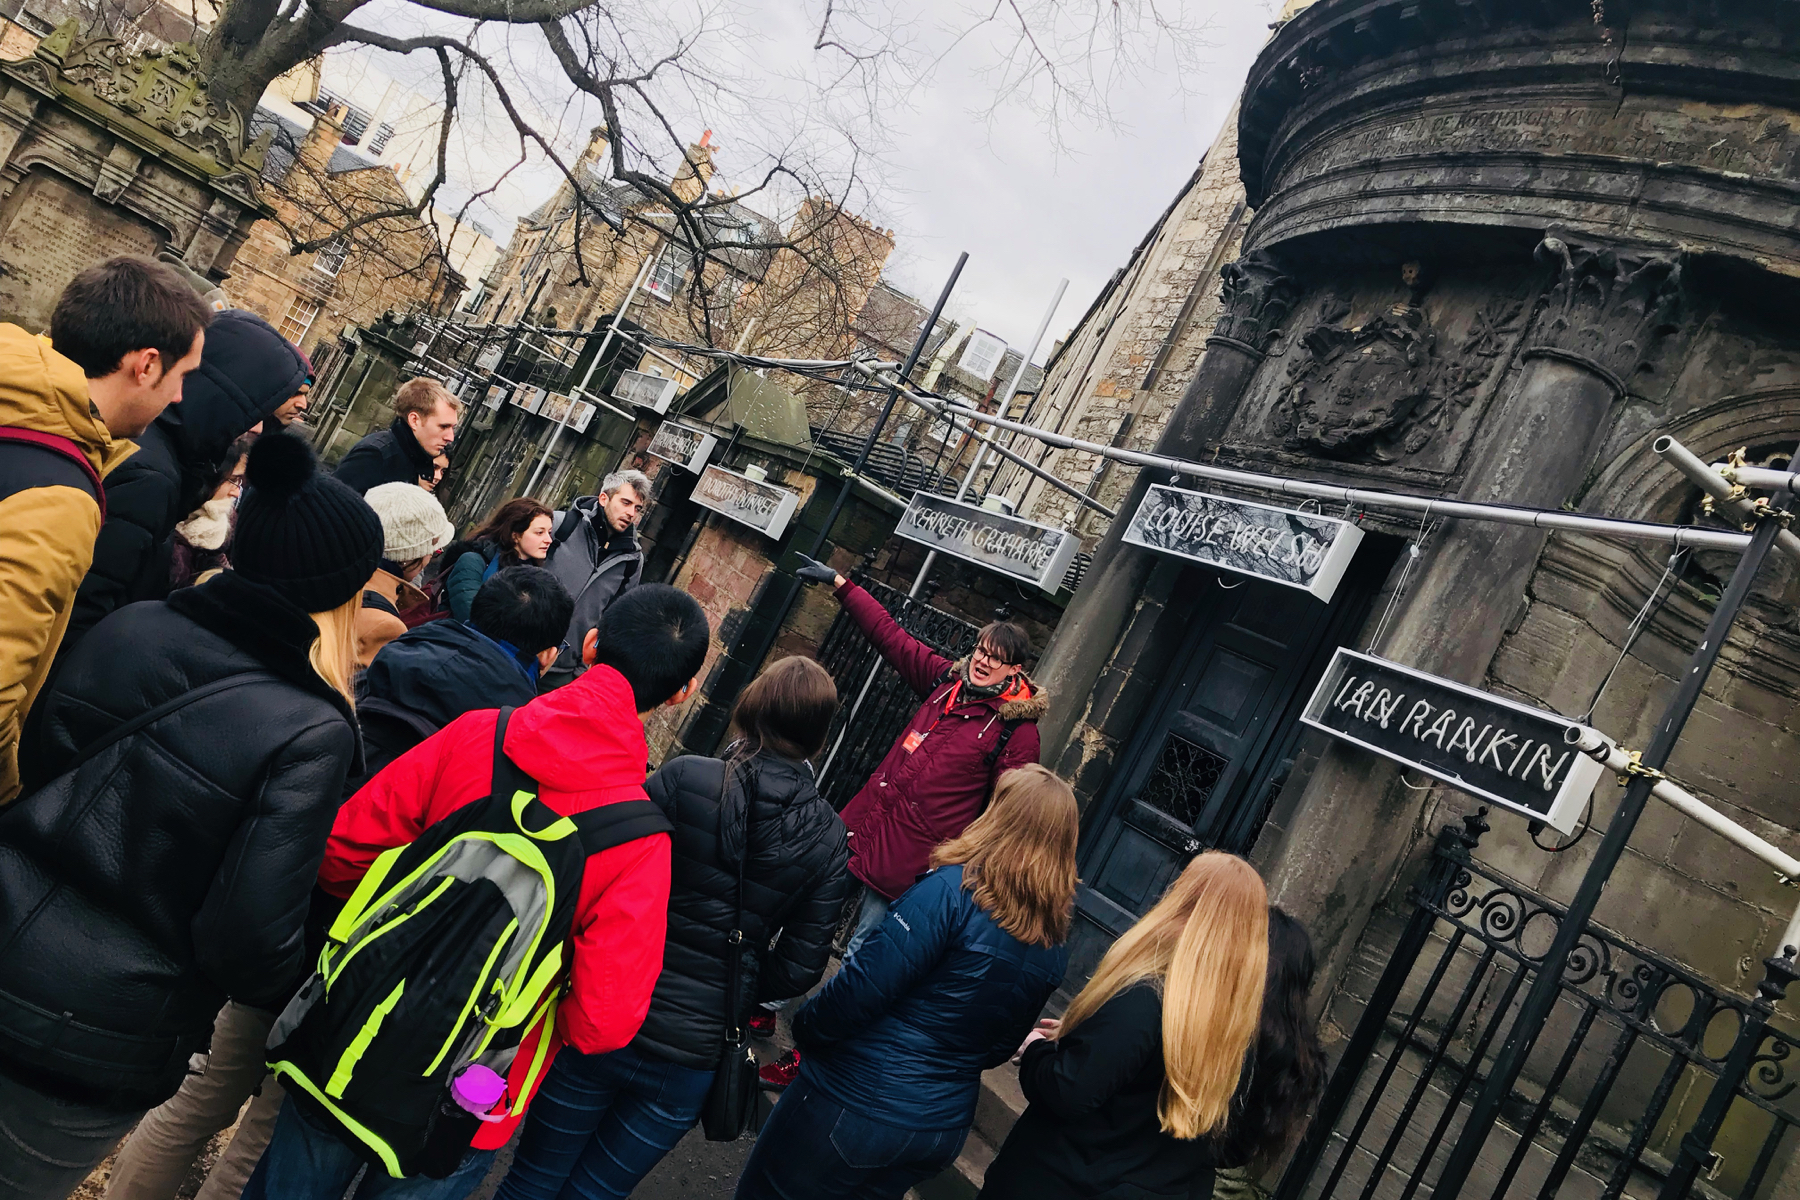 A photo of our tour group in front of Sir George McKenzie's tomb in the Greyfriars Kirkyard